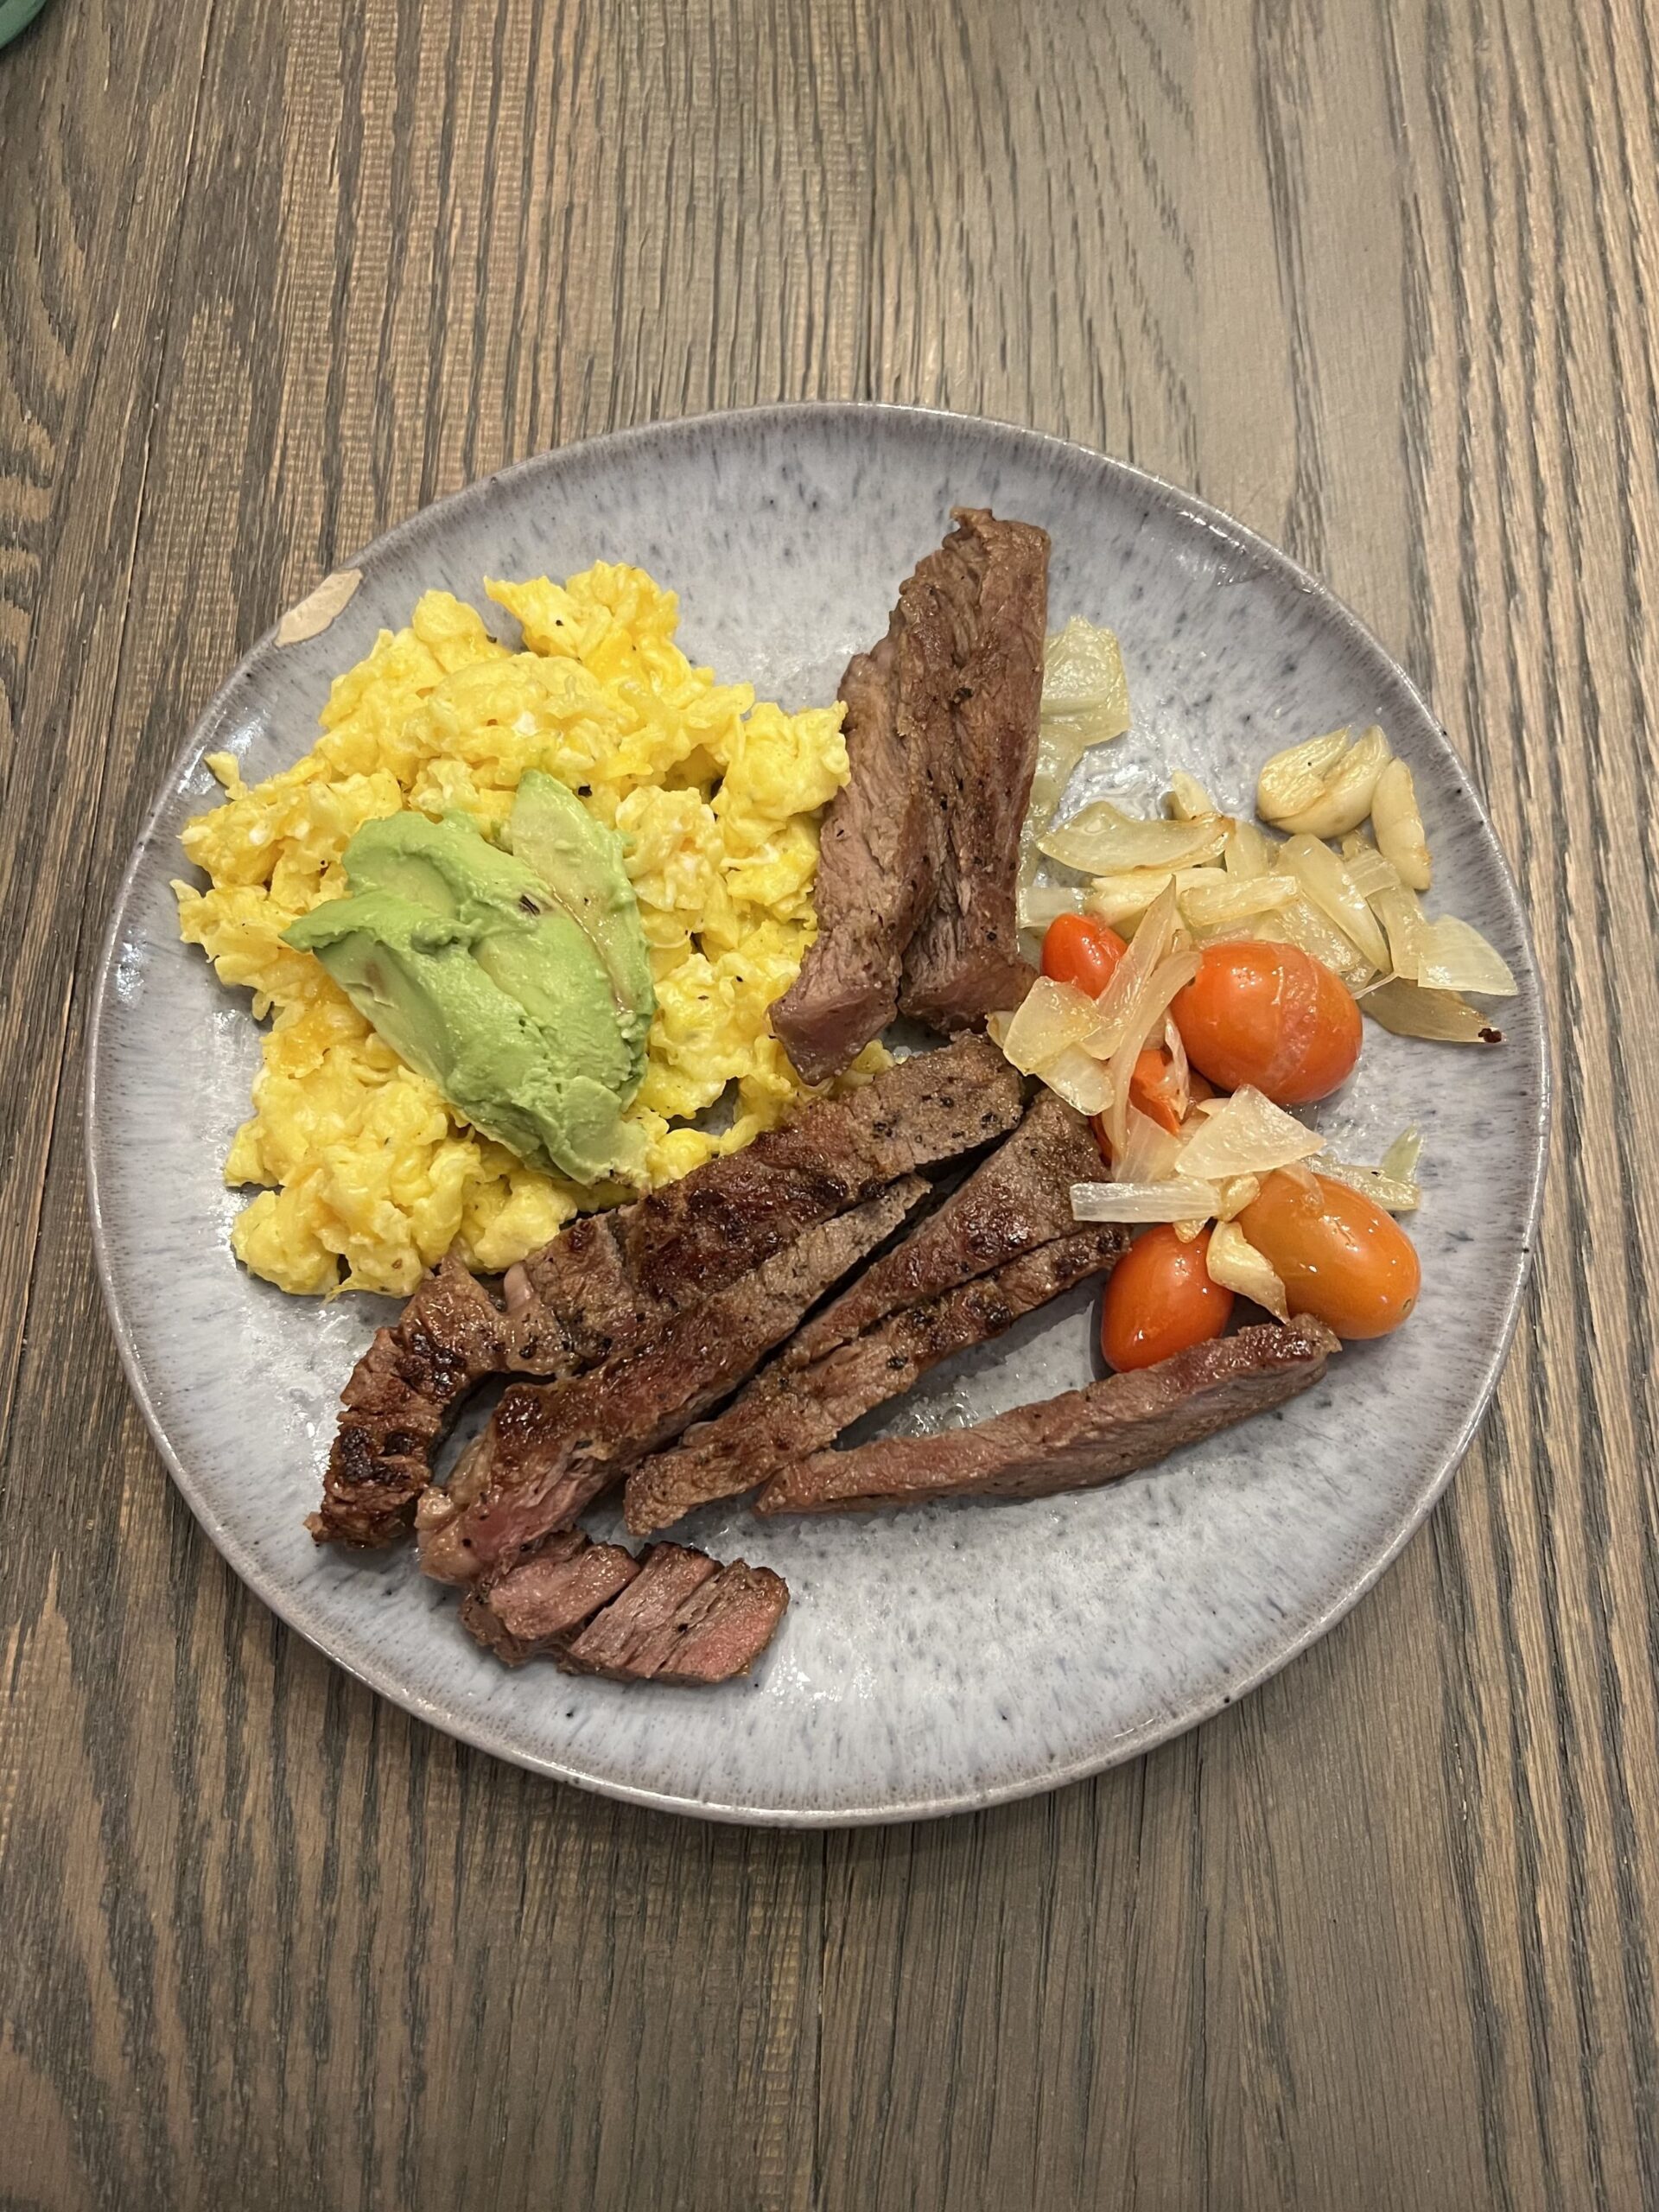 Steak and egg breakfast plate with avocado, scrambled eggs, steak well done, tomatoes and onions